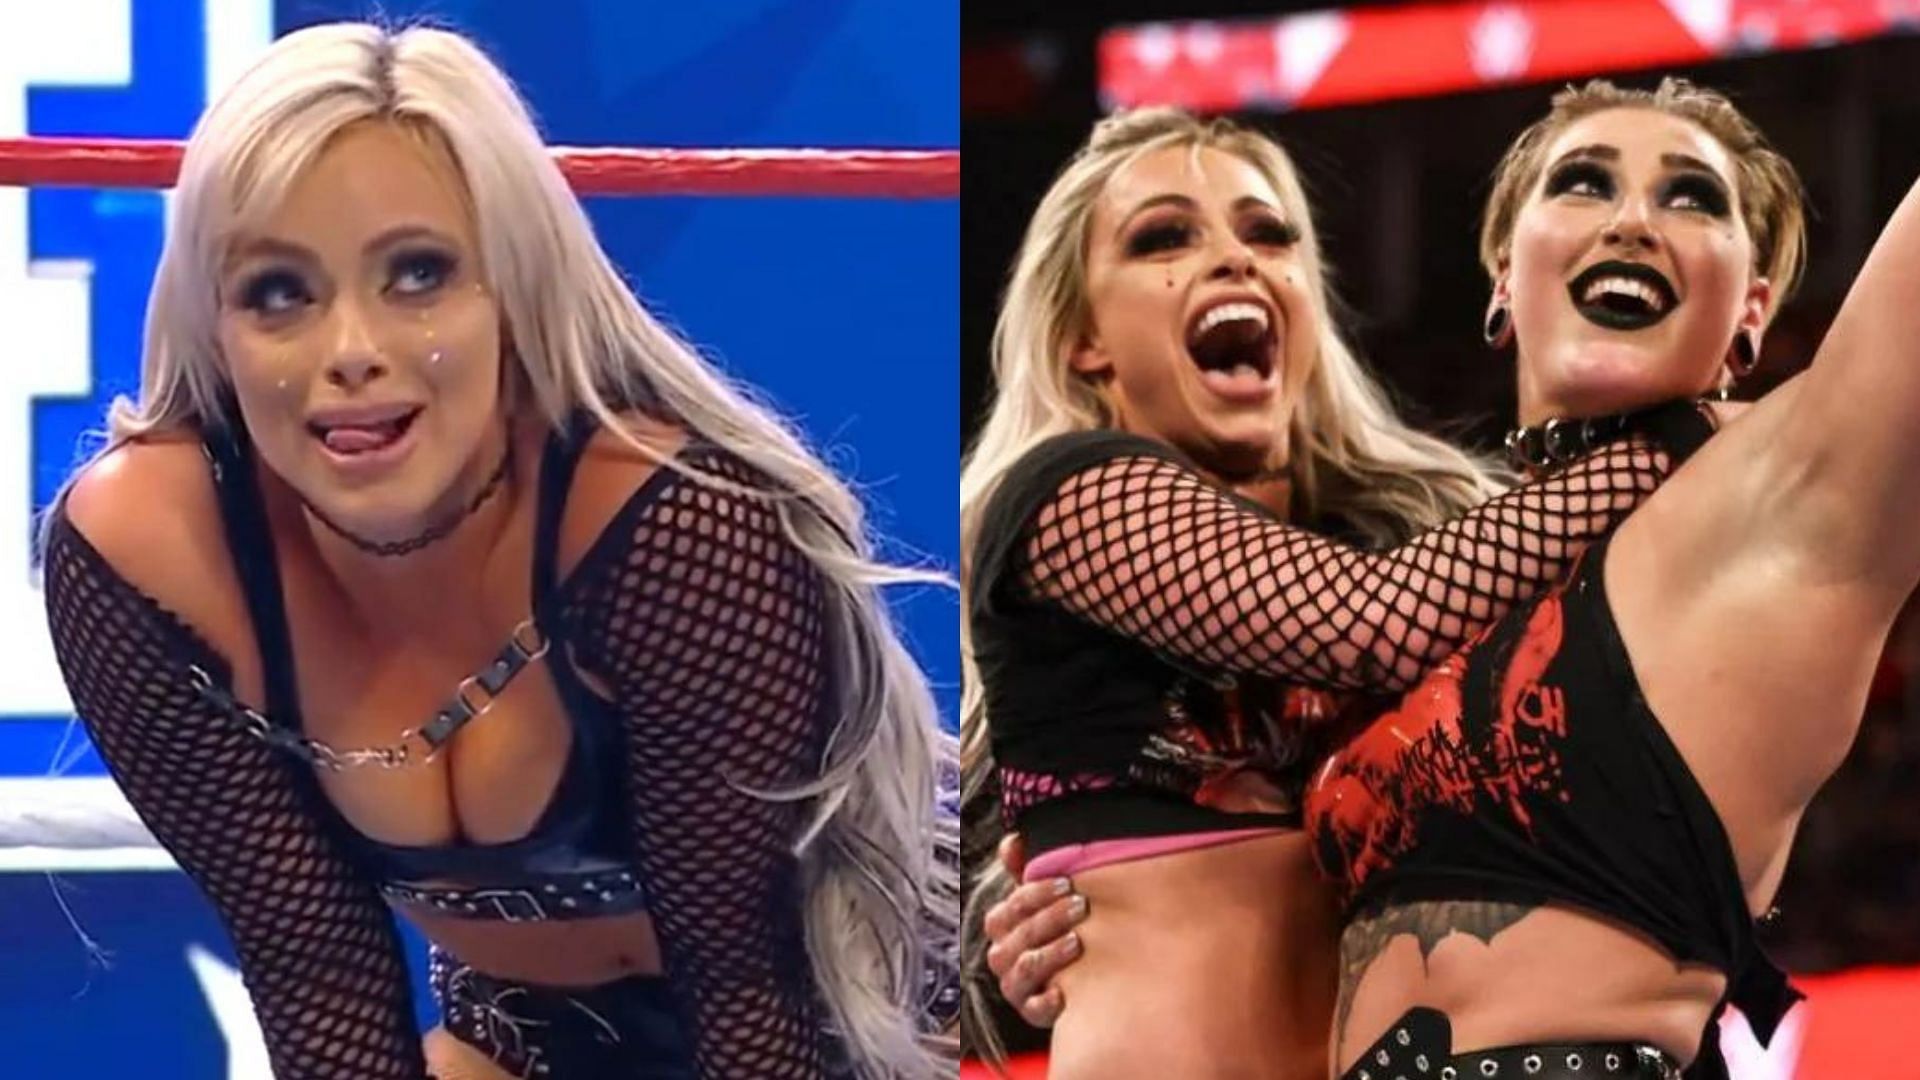 Liv Morgan will be in action against Rhea Ripley on SmackDown